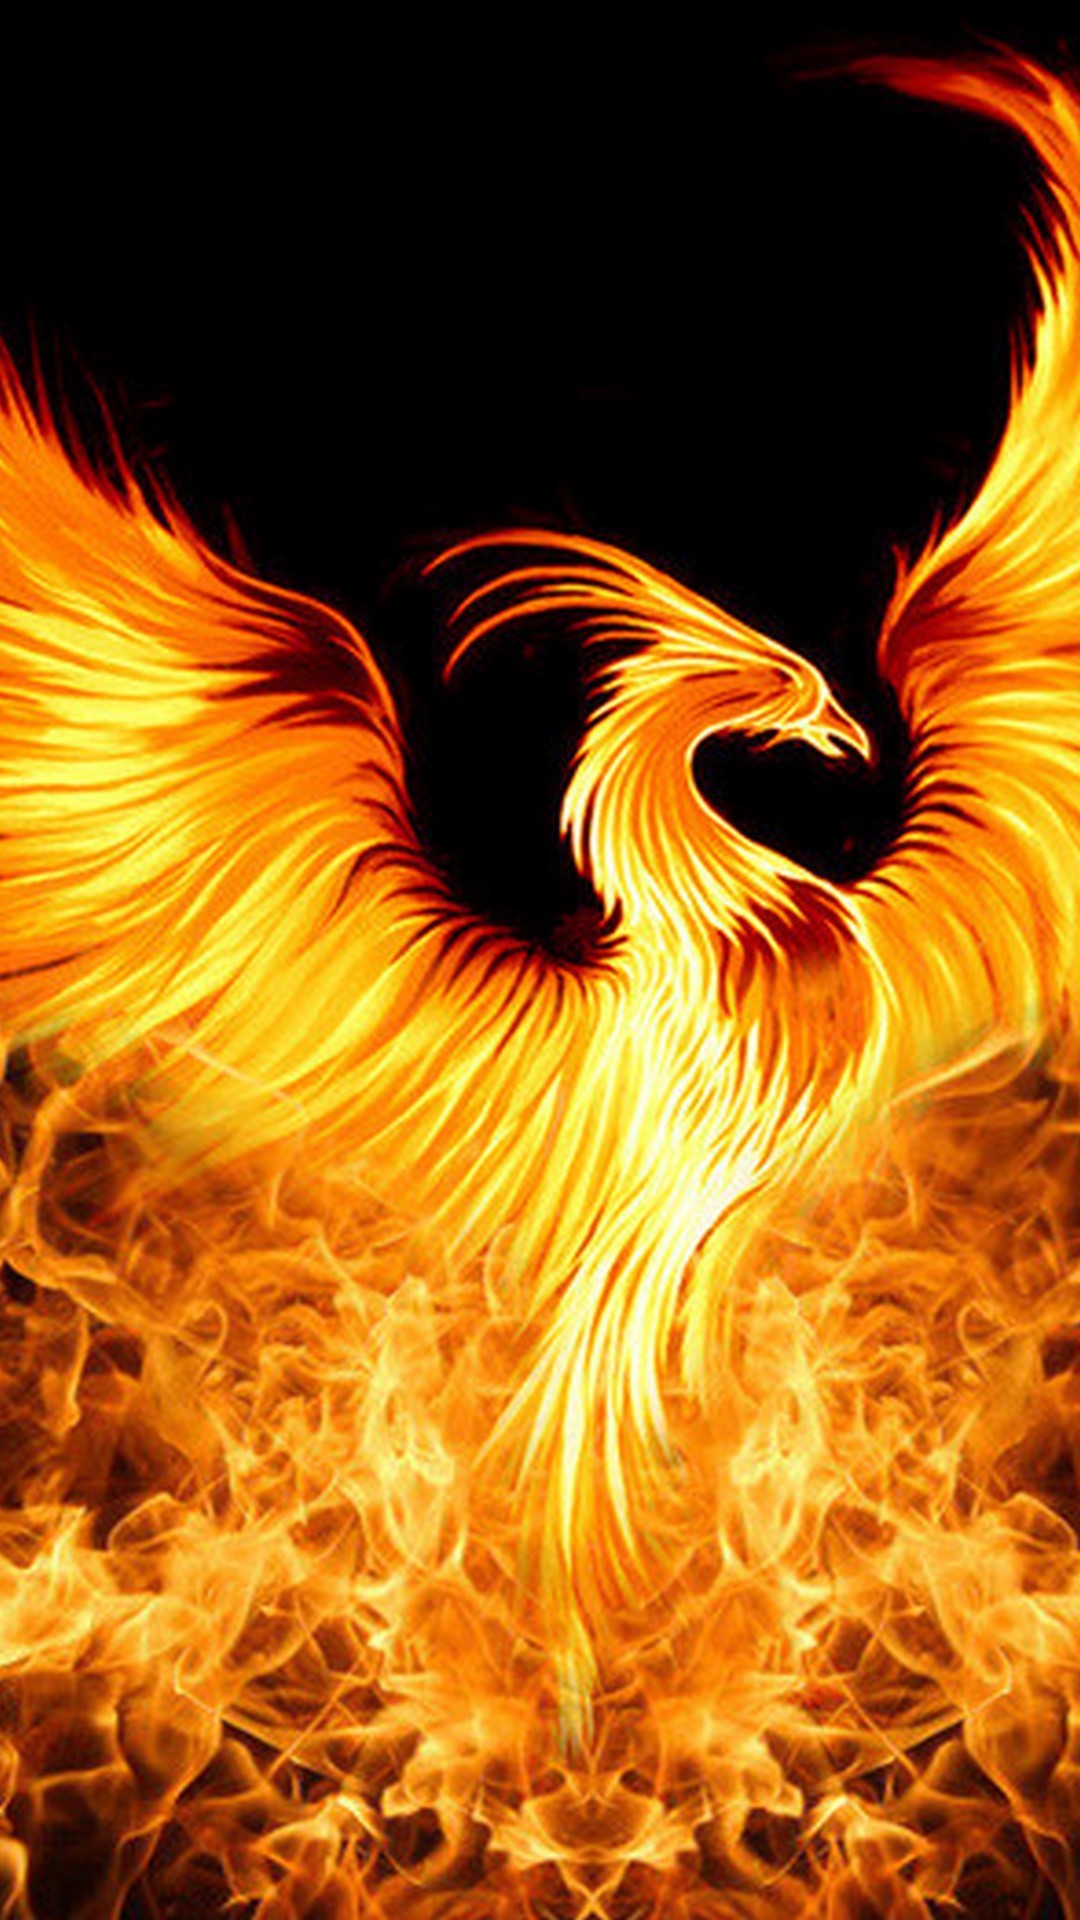 Phoenix Backgrounds For Android with resolution 1080X1920 pixel. You can make this wallpaper for your Android backgrounds, Tablet, Smartphones Screensavers and Mobile Phone Lock Screen